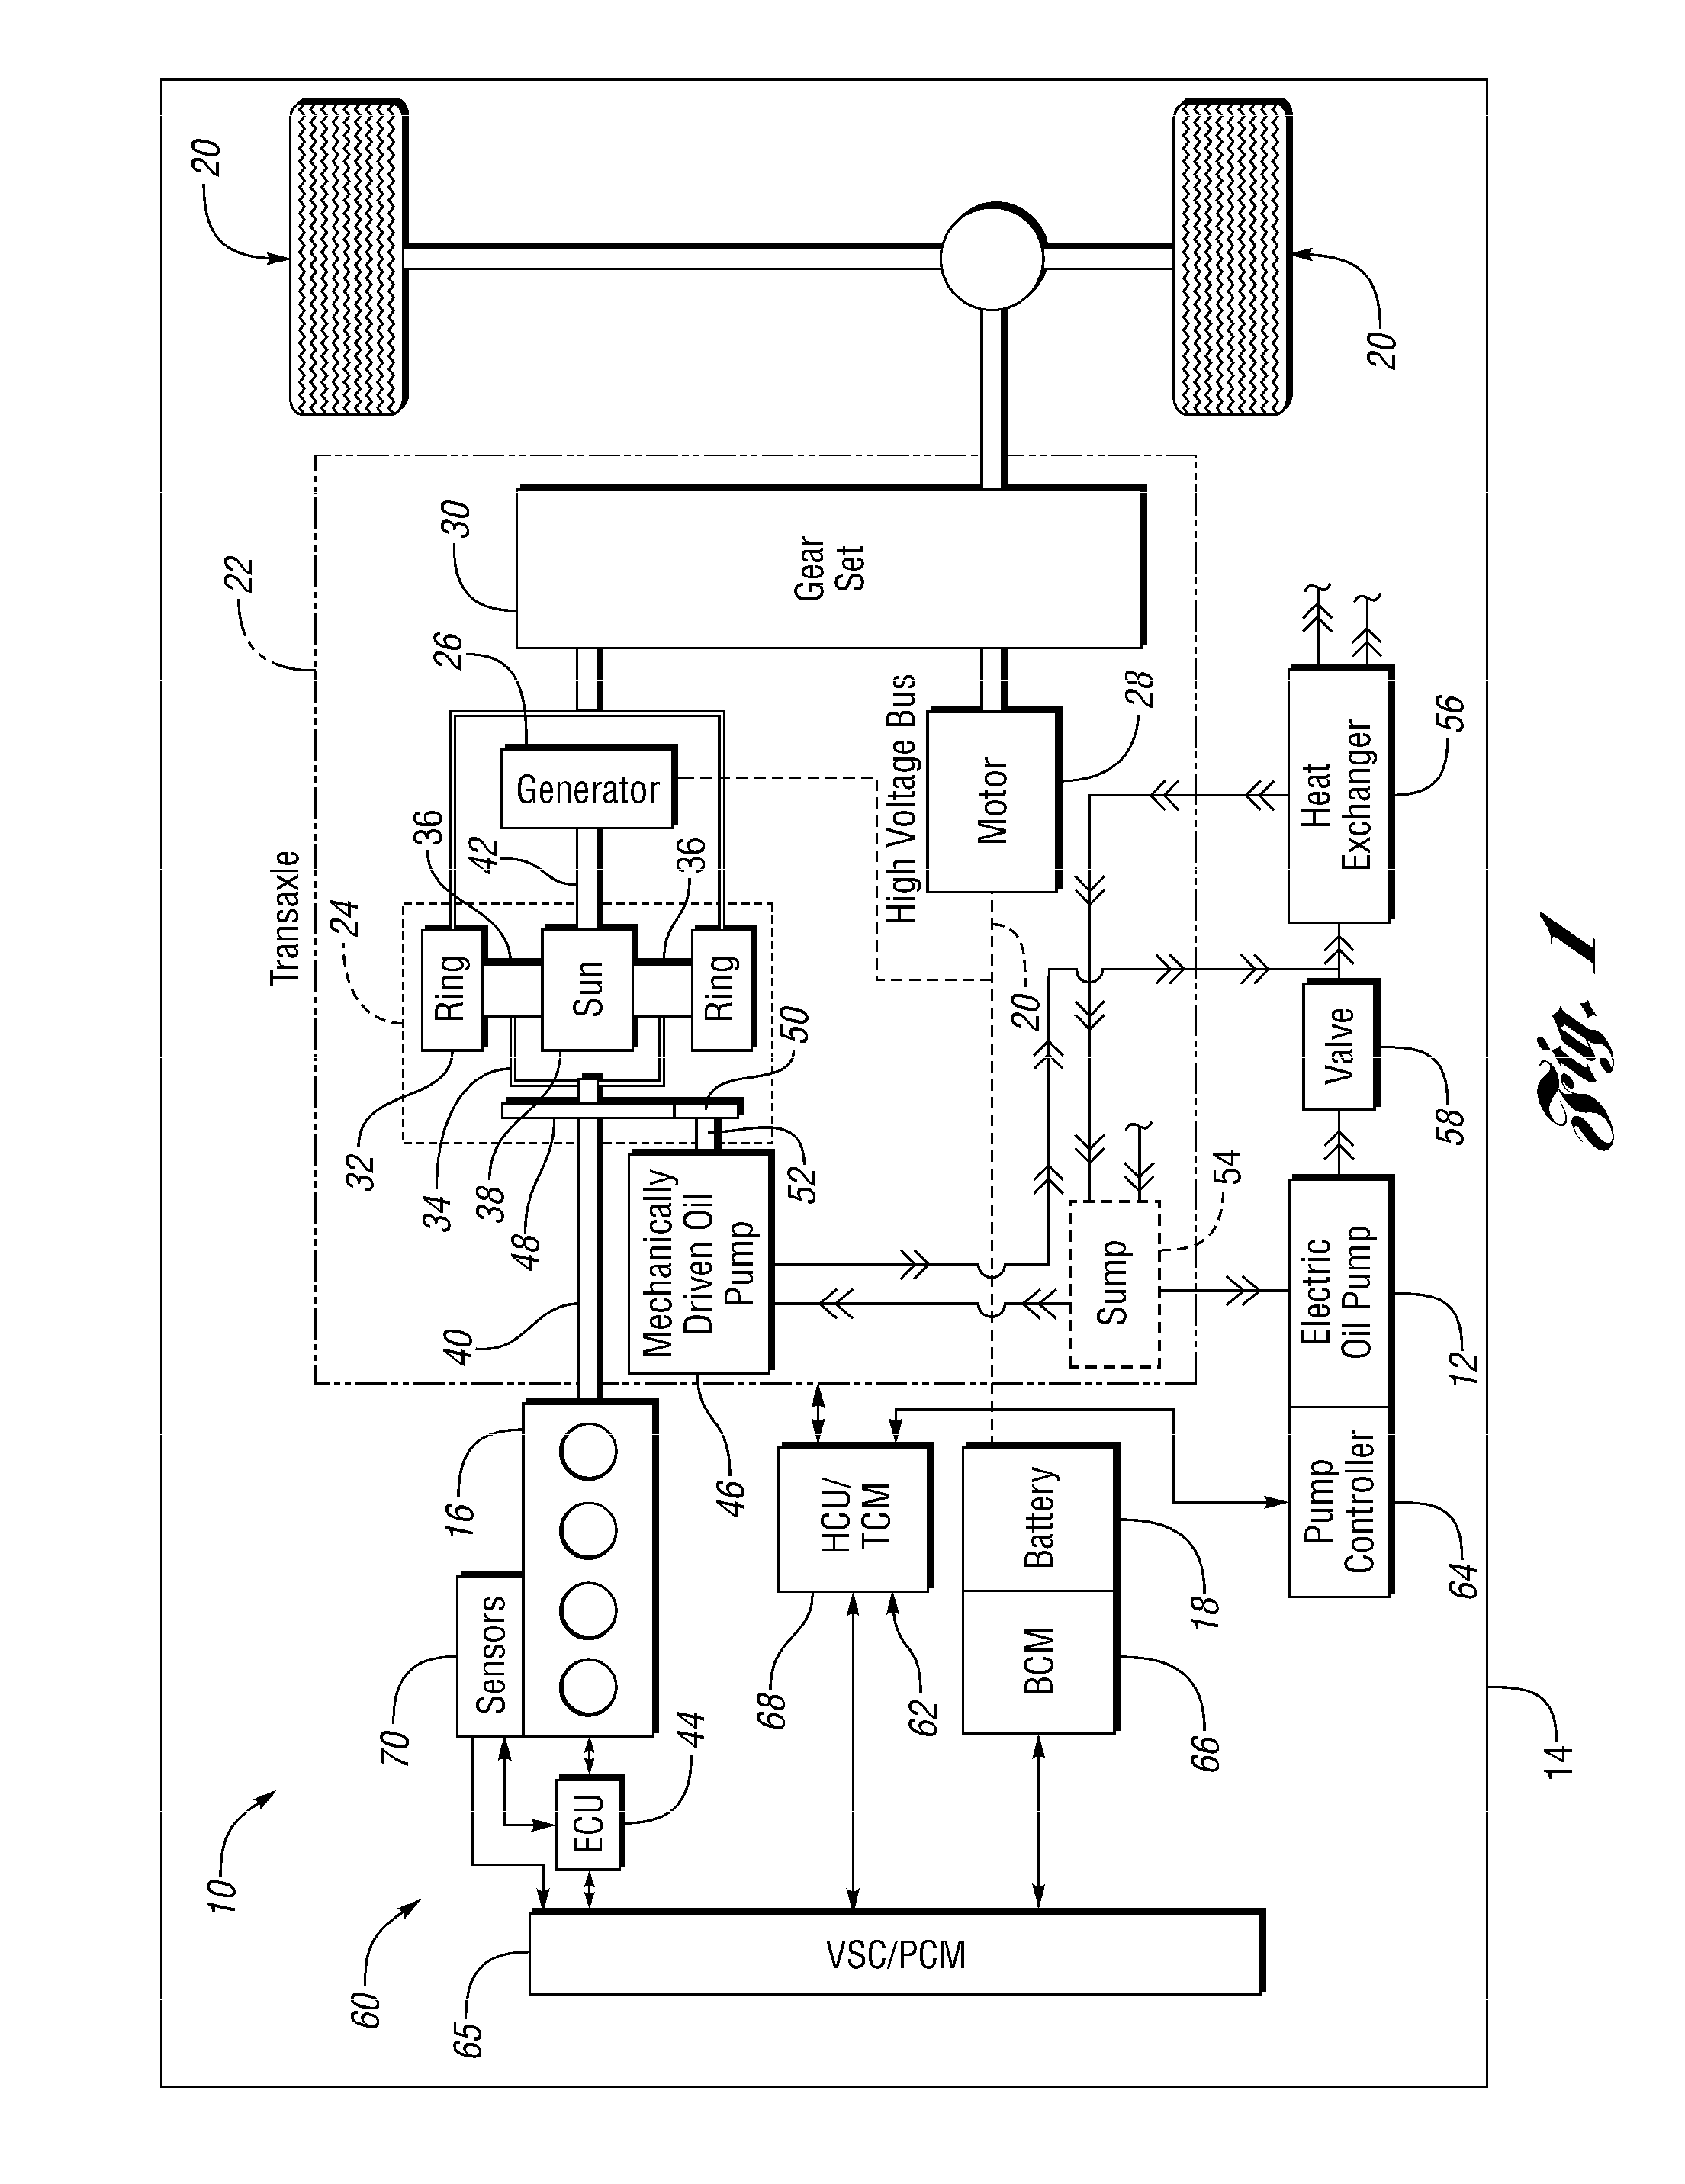 Method And System For Controlling Operation Of An Electric Oil Pump In A Hybrid Electric Vehicle (HEV)